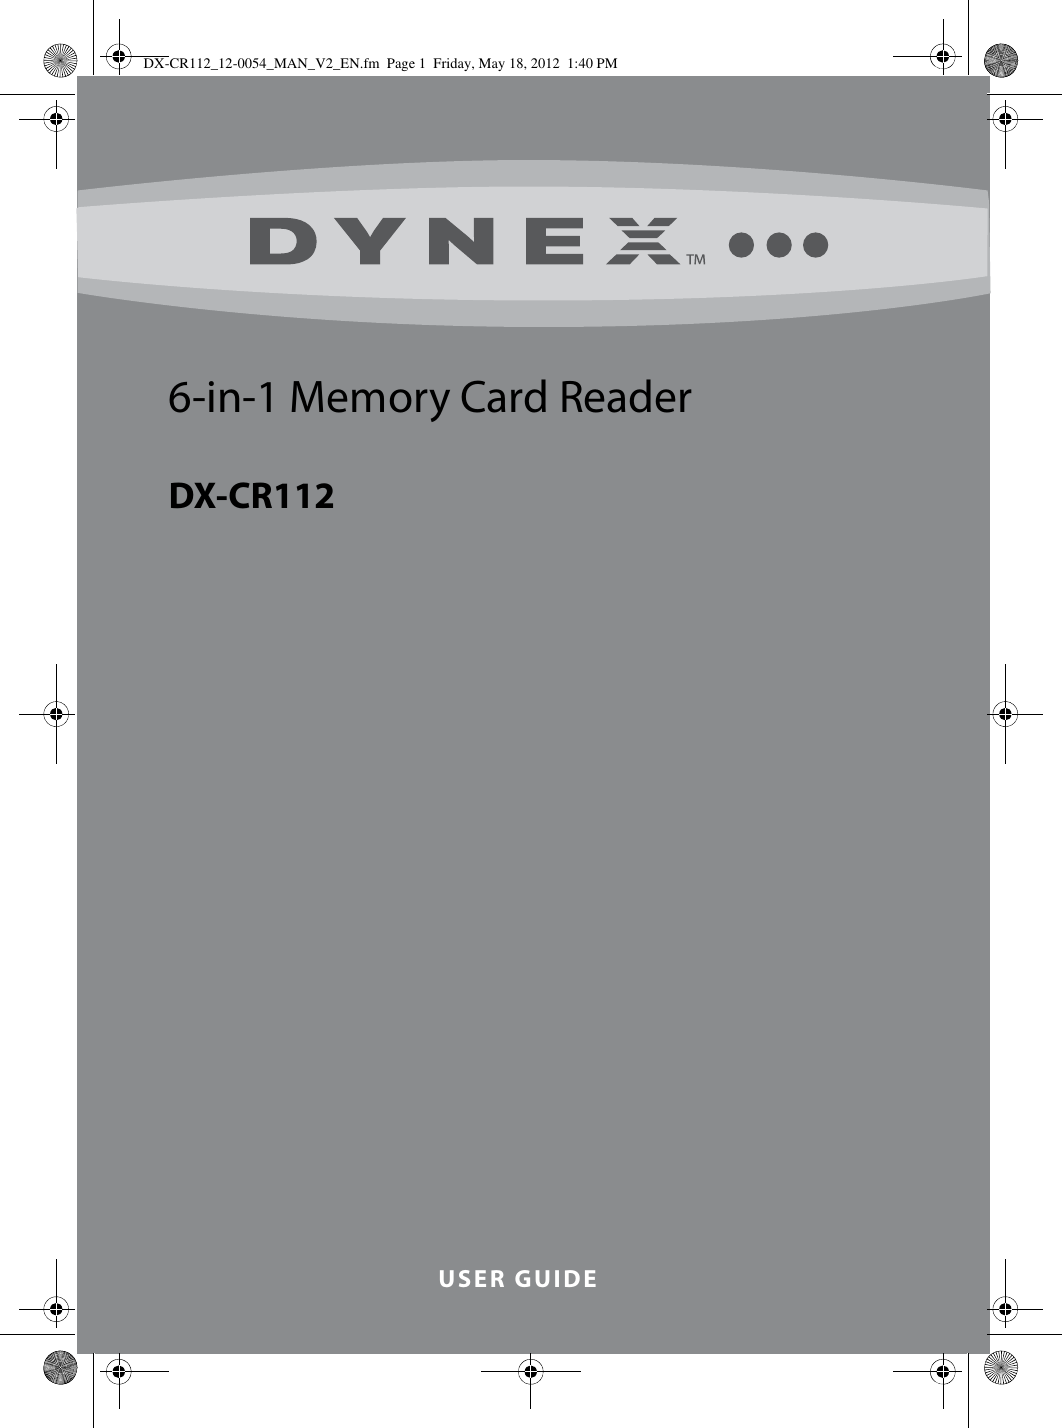 Page 1 of 11 - Dynex Dynex-6-In-1-Memory-Card-Reader-Dx-Cr112-Users-Manual- DX-CR112_12-0054_MAN_V2_EN  Dynex-6-in-1-memory-card-reader-dx-cr112-users-manual